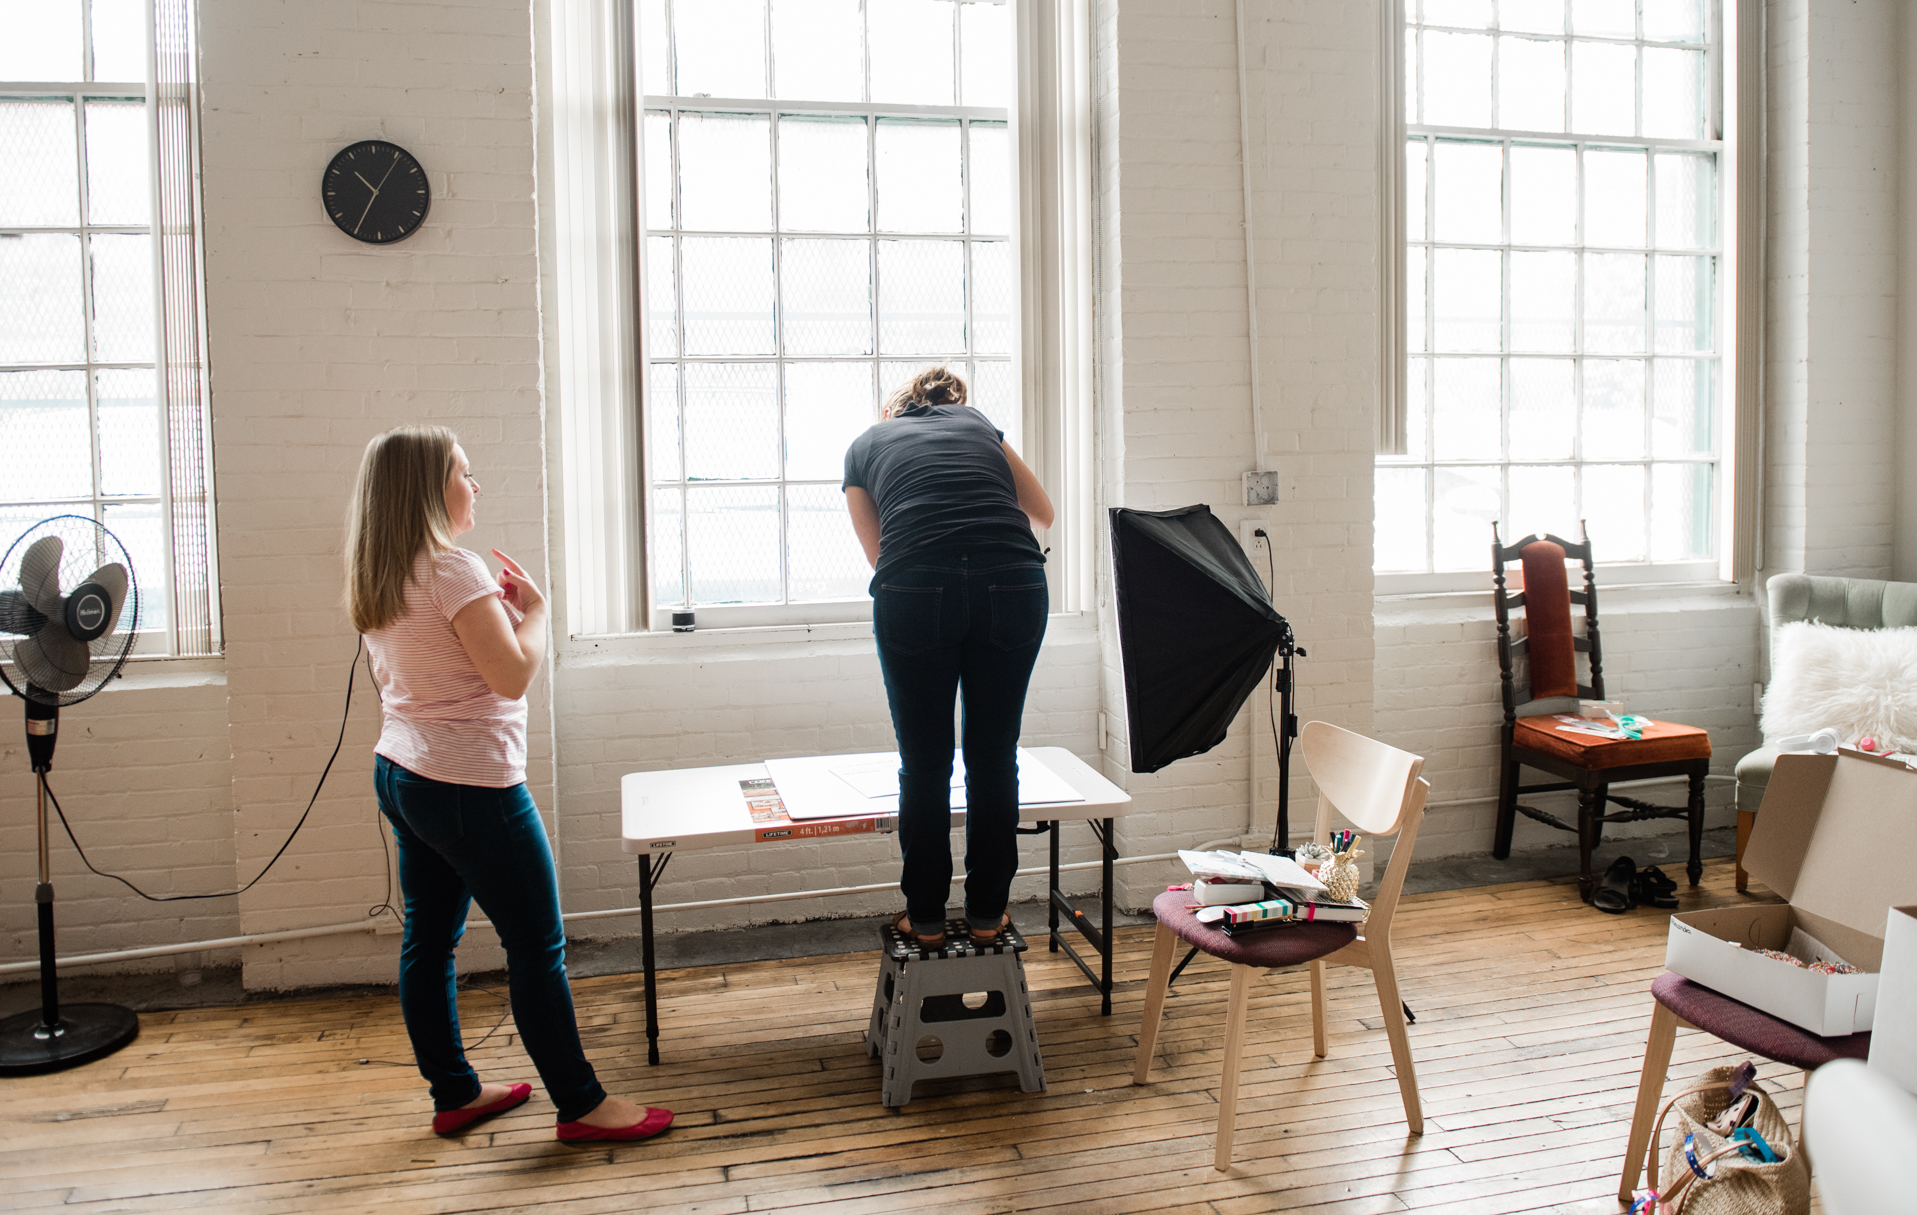 behind the scenes of jamie bannon photography brand shoot with the productivity zone, photographed by christina wesley photography.